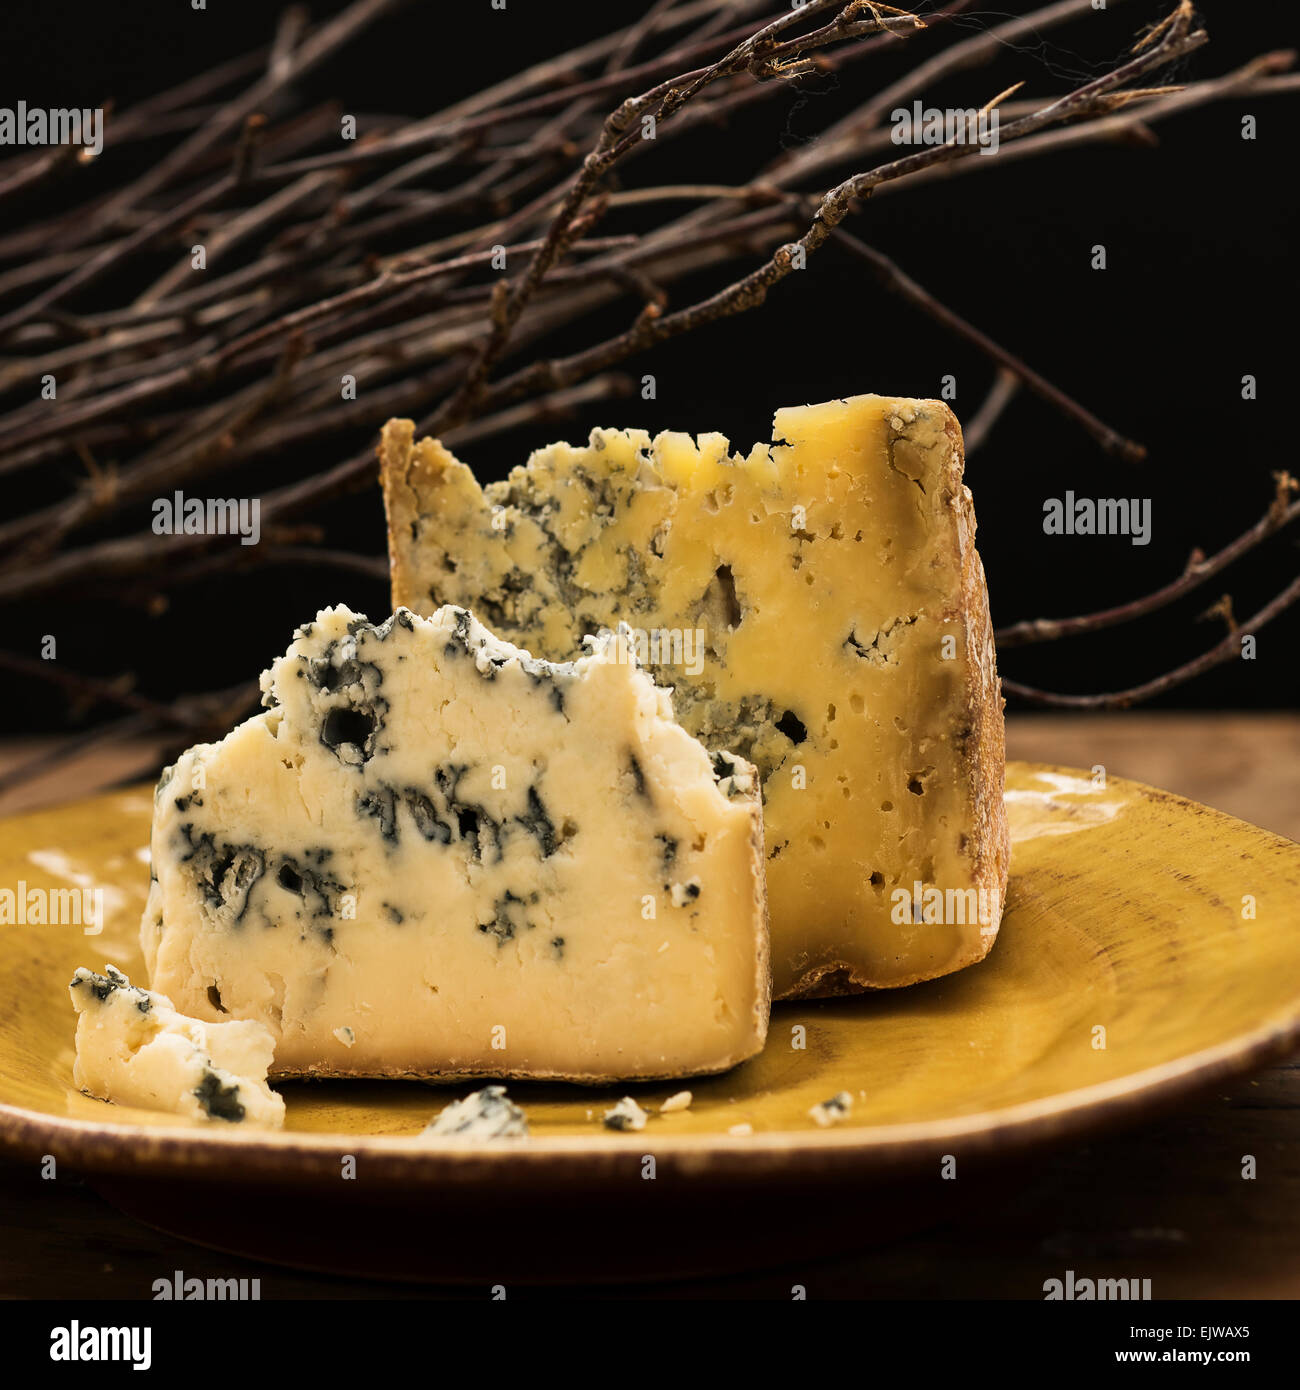 Blue cheese slices on plate, studio shot Stock Photo